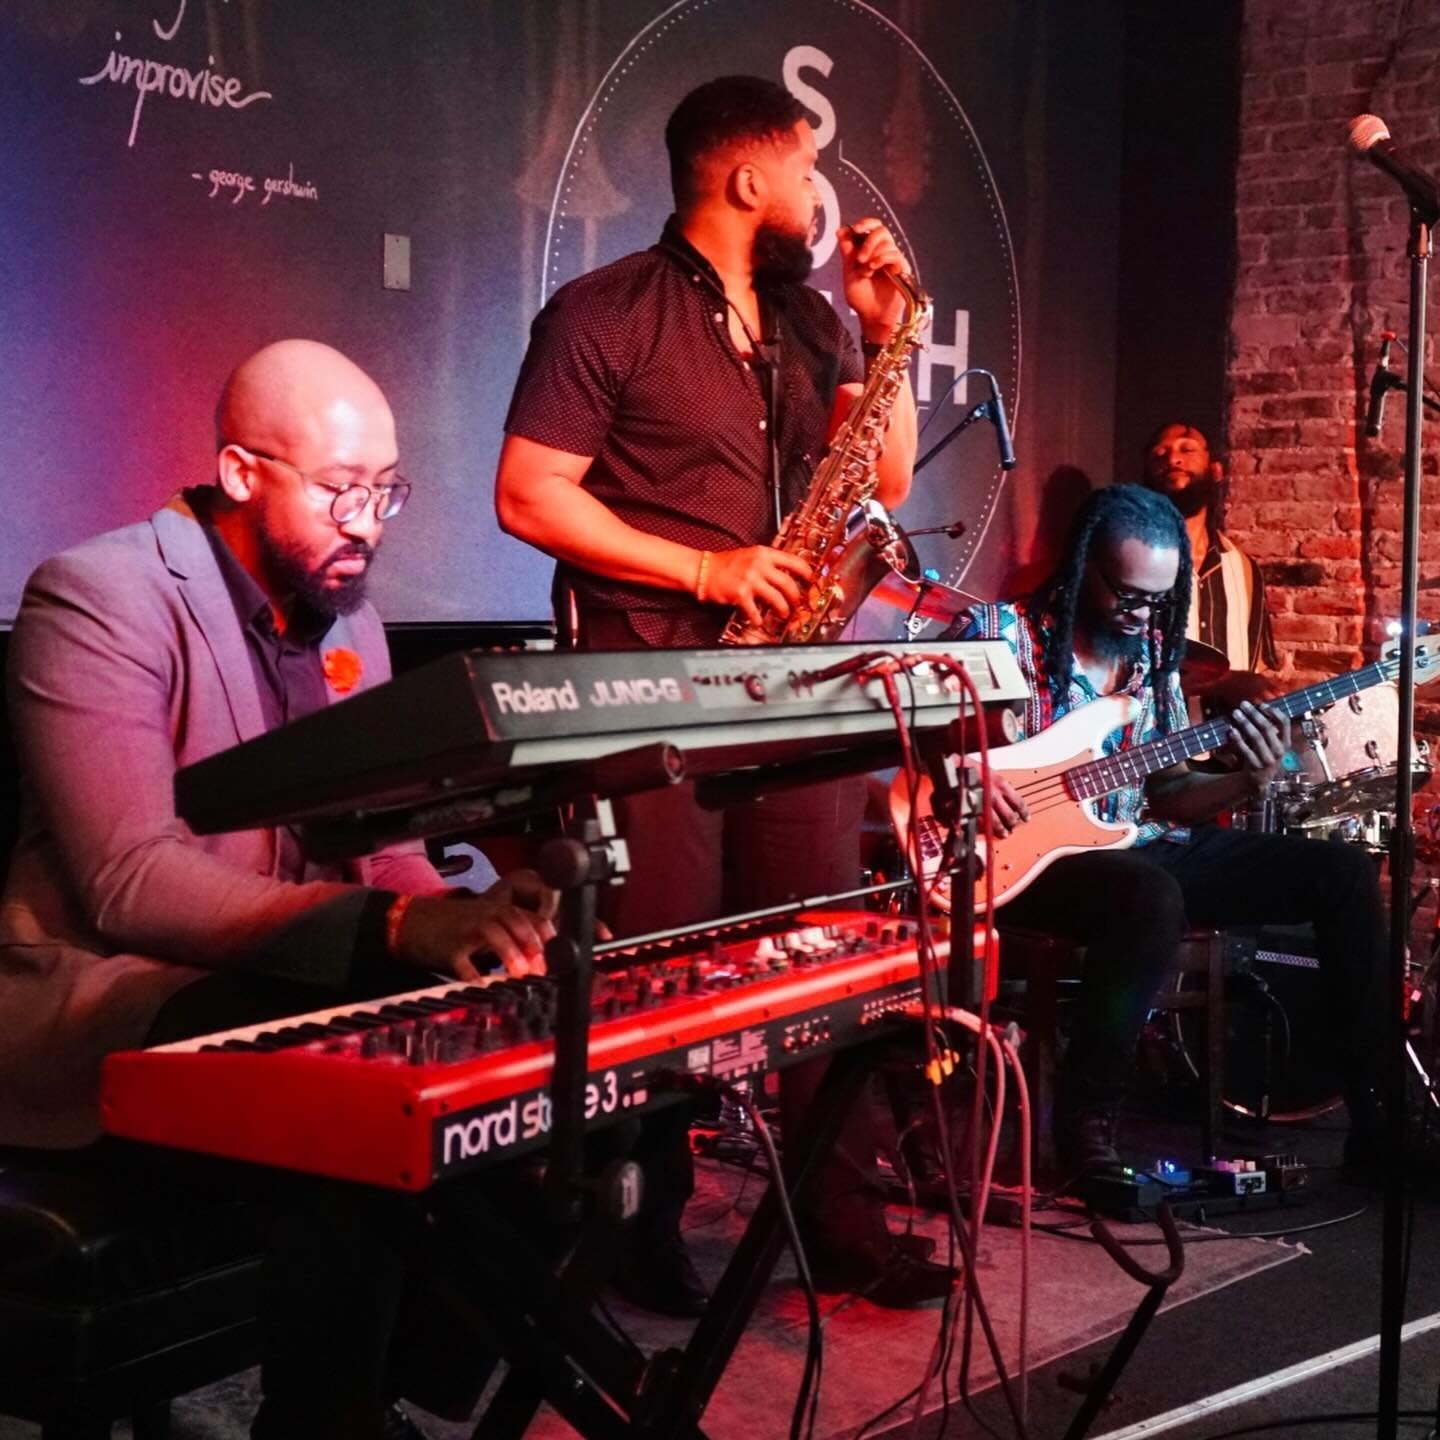 We hope you enjoyed our debut performance at @southjazzkitchen; we definitely did! 😊
.
📷: @arshaylacreativestudios 
.
#TheSmoothShow #livemusic #phillylivemusic #live #music #philly #philadelphia #musician #band #sax #saxophone #drums #bass #piano 